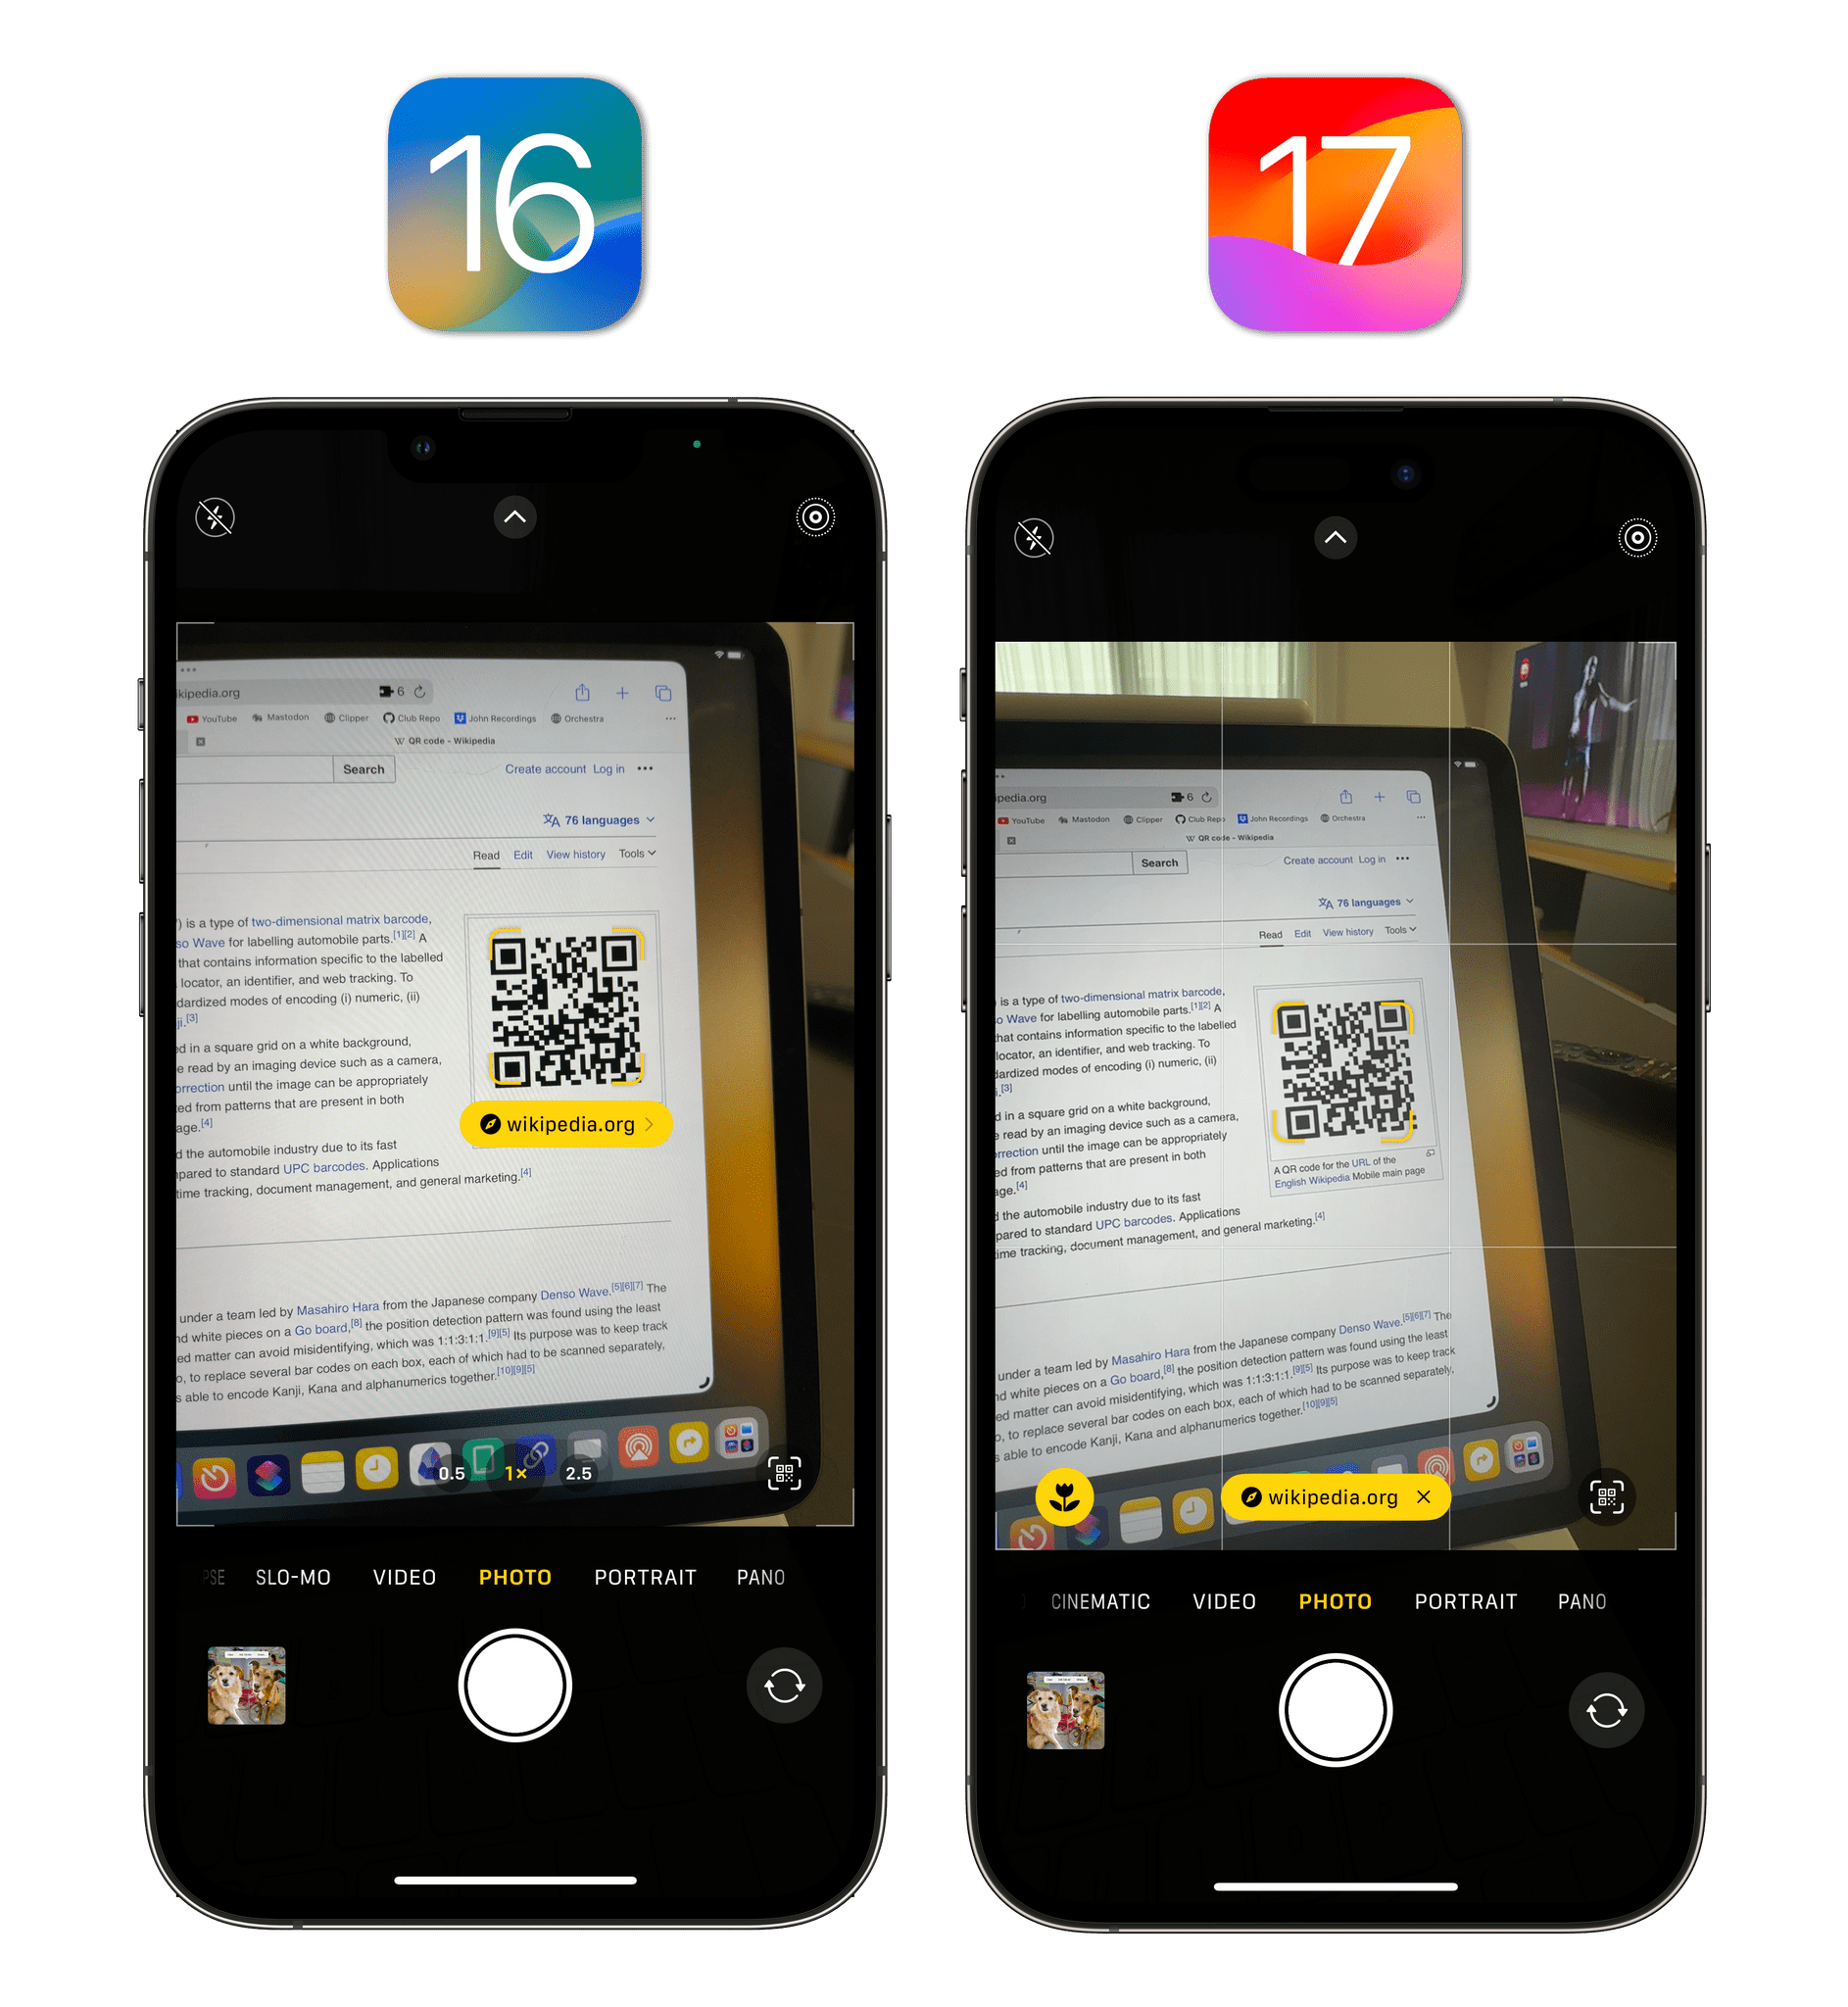 The updated QR scanner UI in iOS 17.